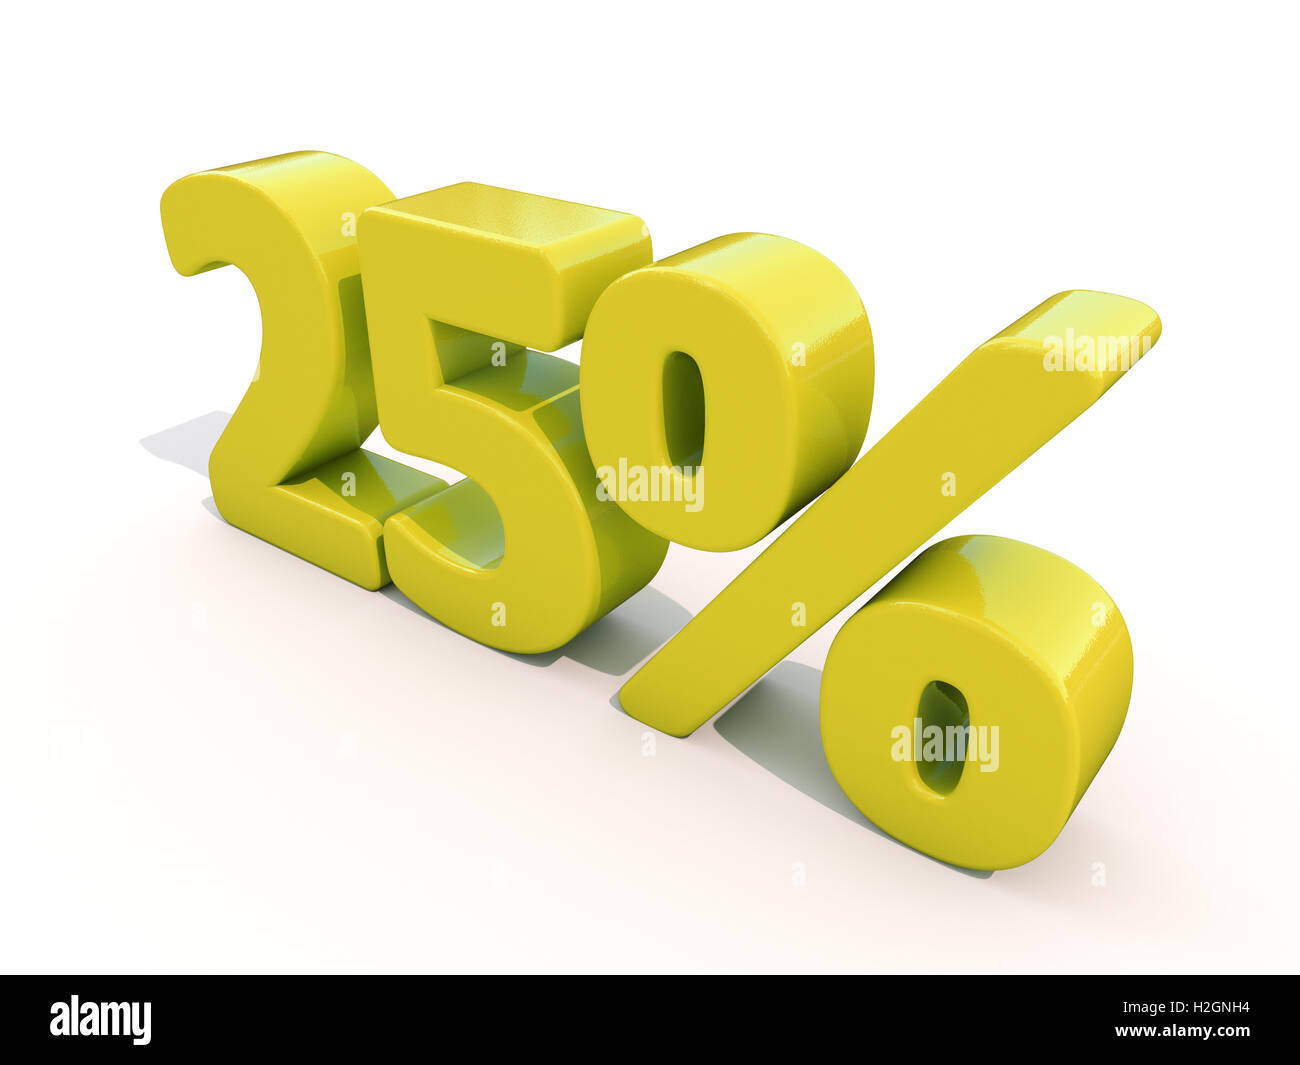 Percentage rate icon on a white background Stock Photo